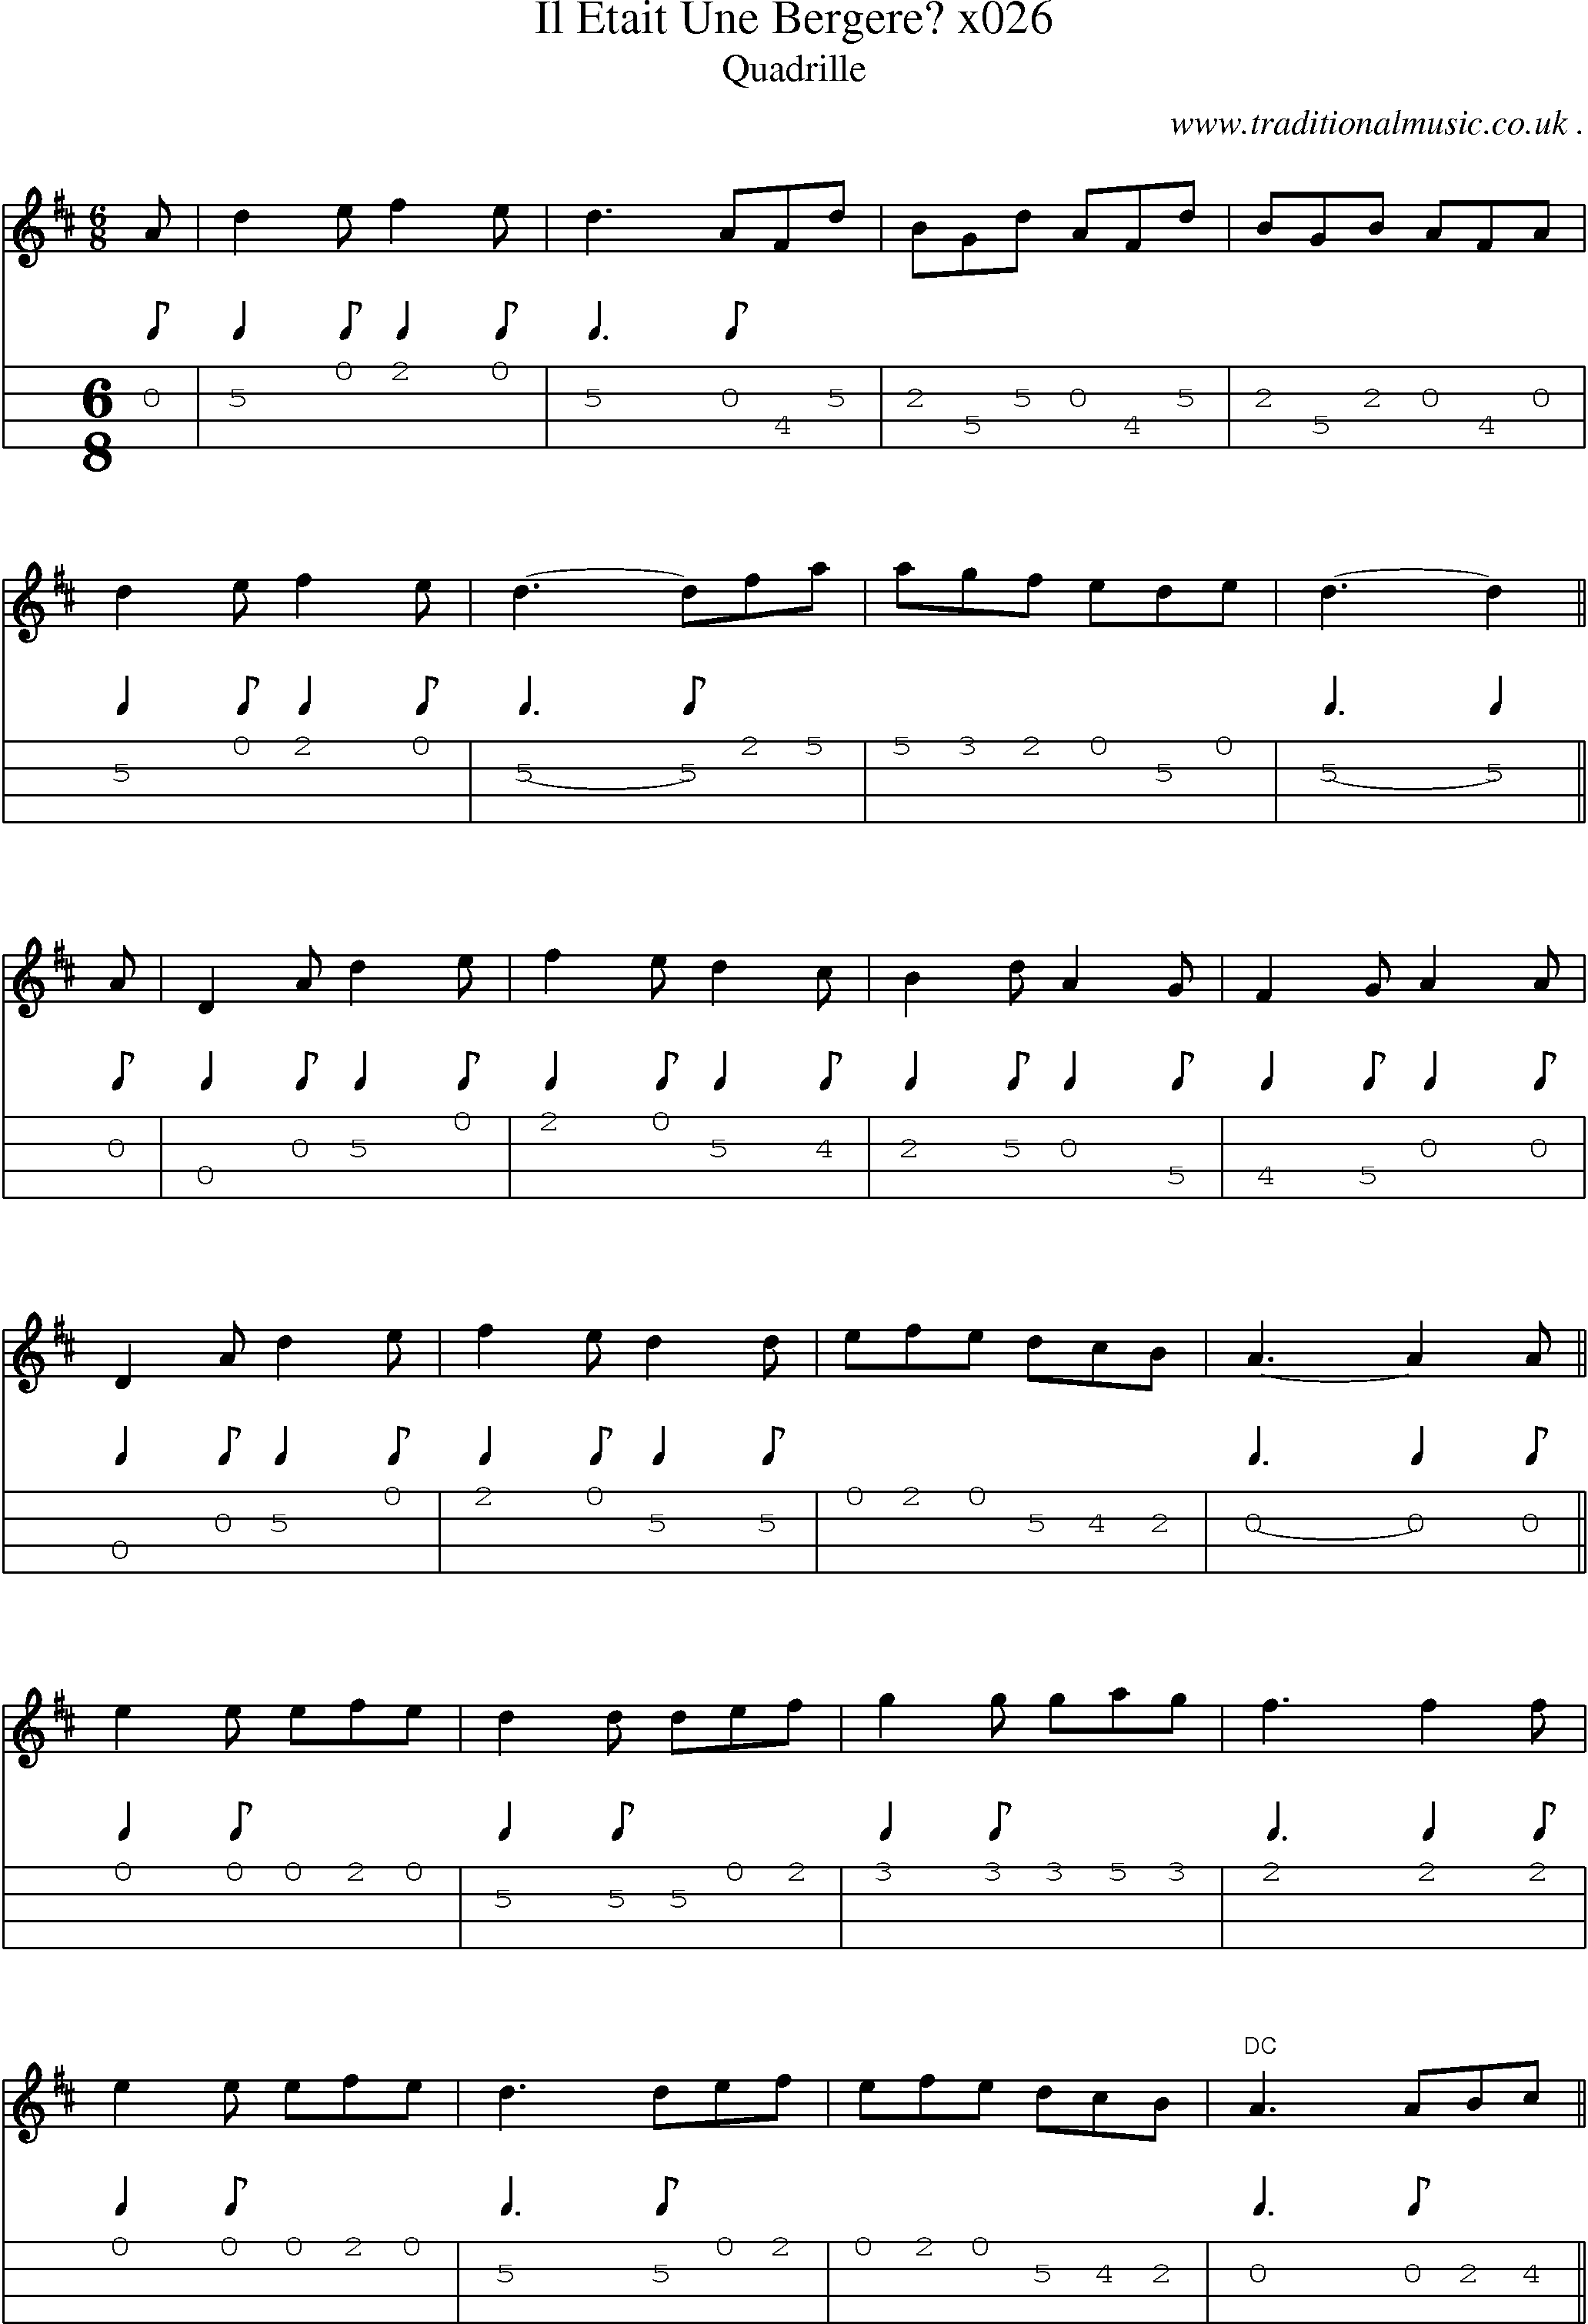 Sheet-Music and Mandolin Tabs for Il Etait Une Bergere X026